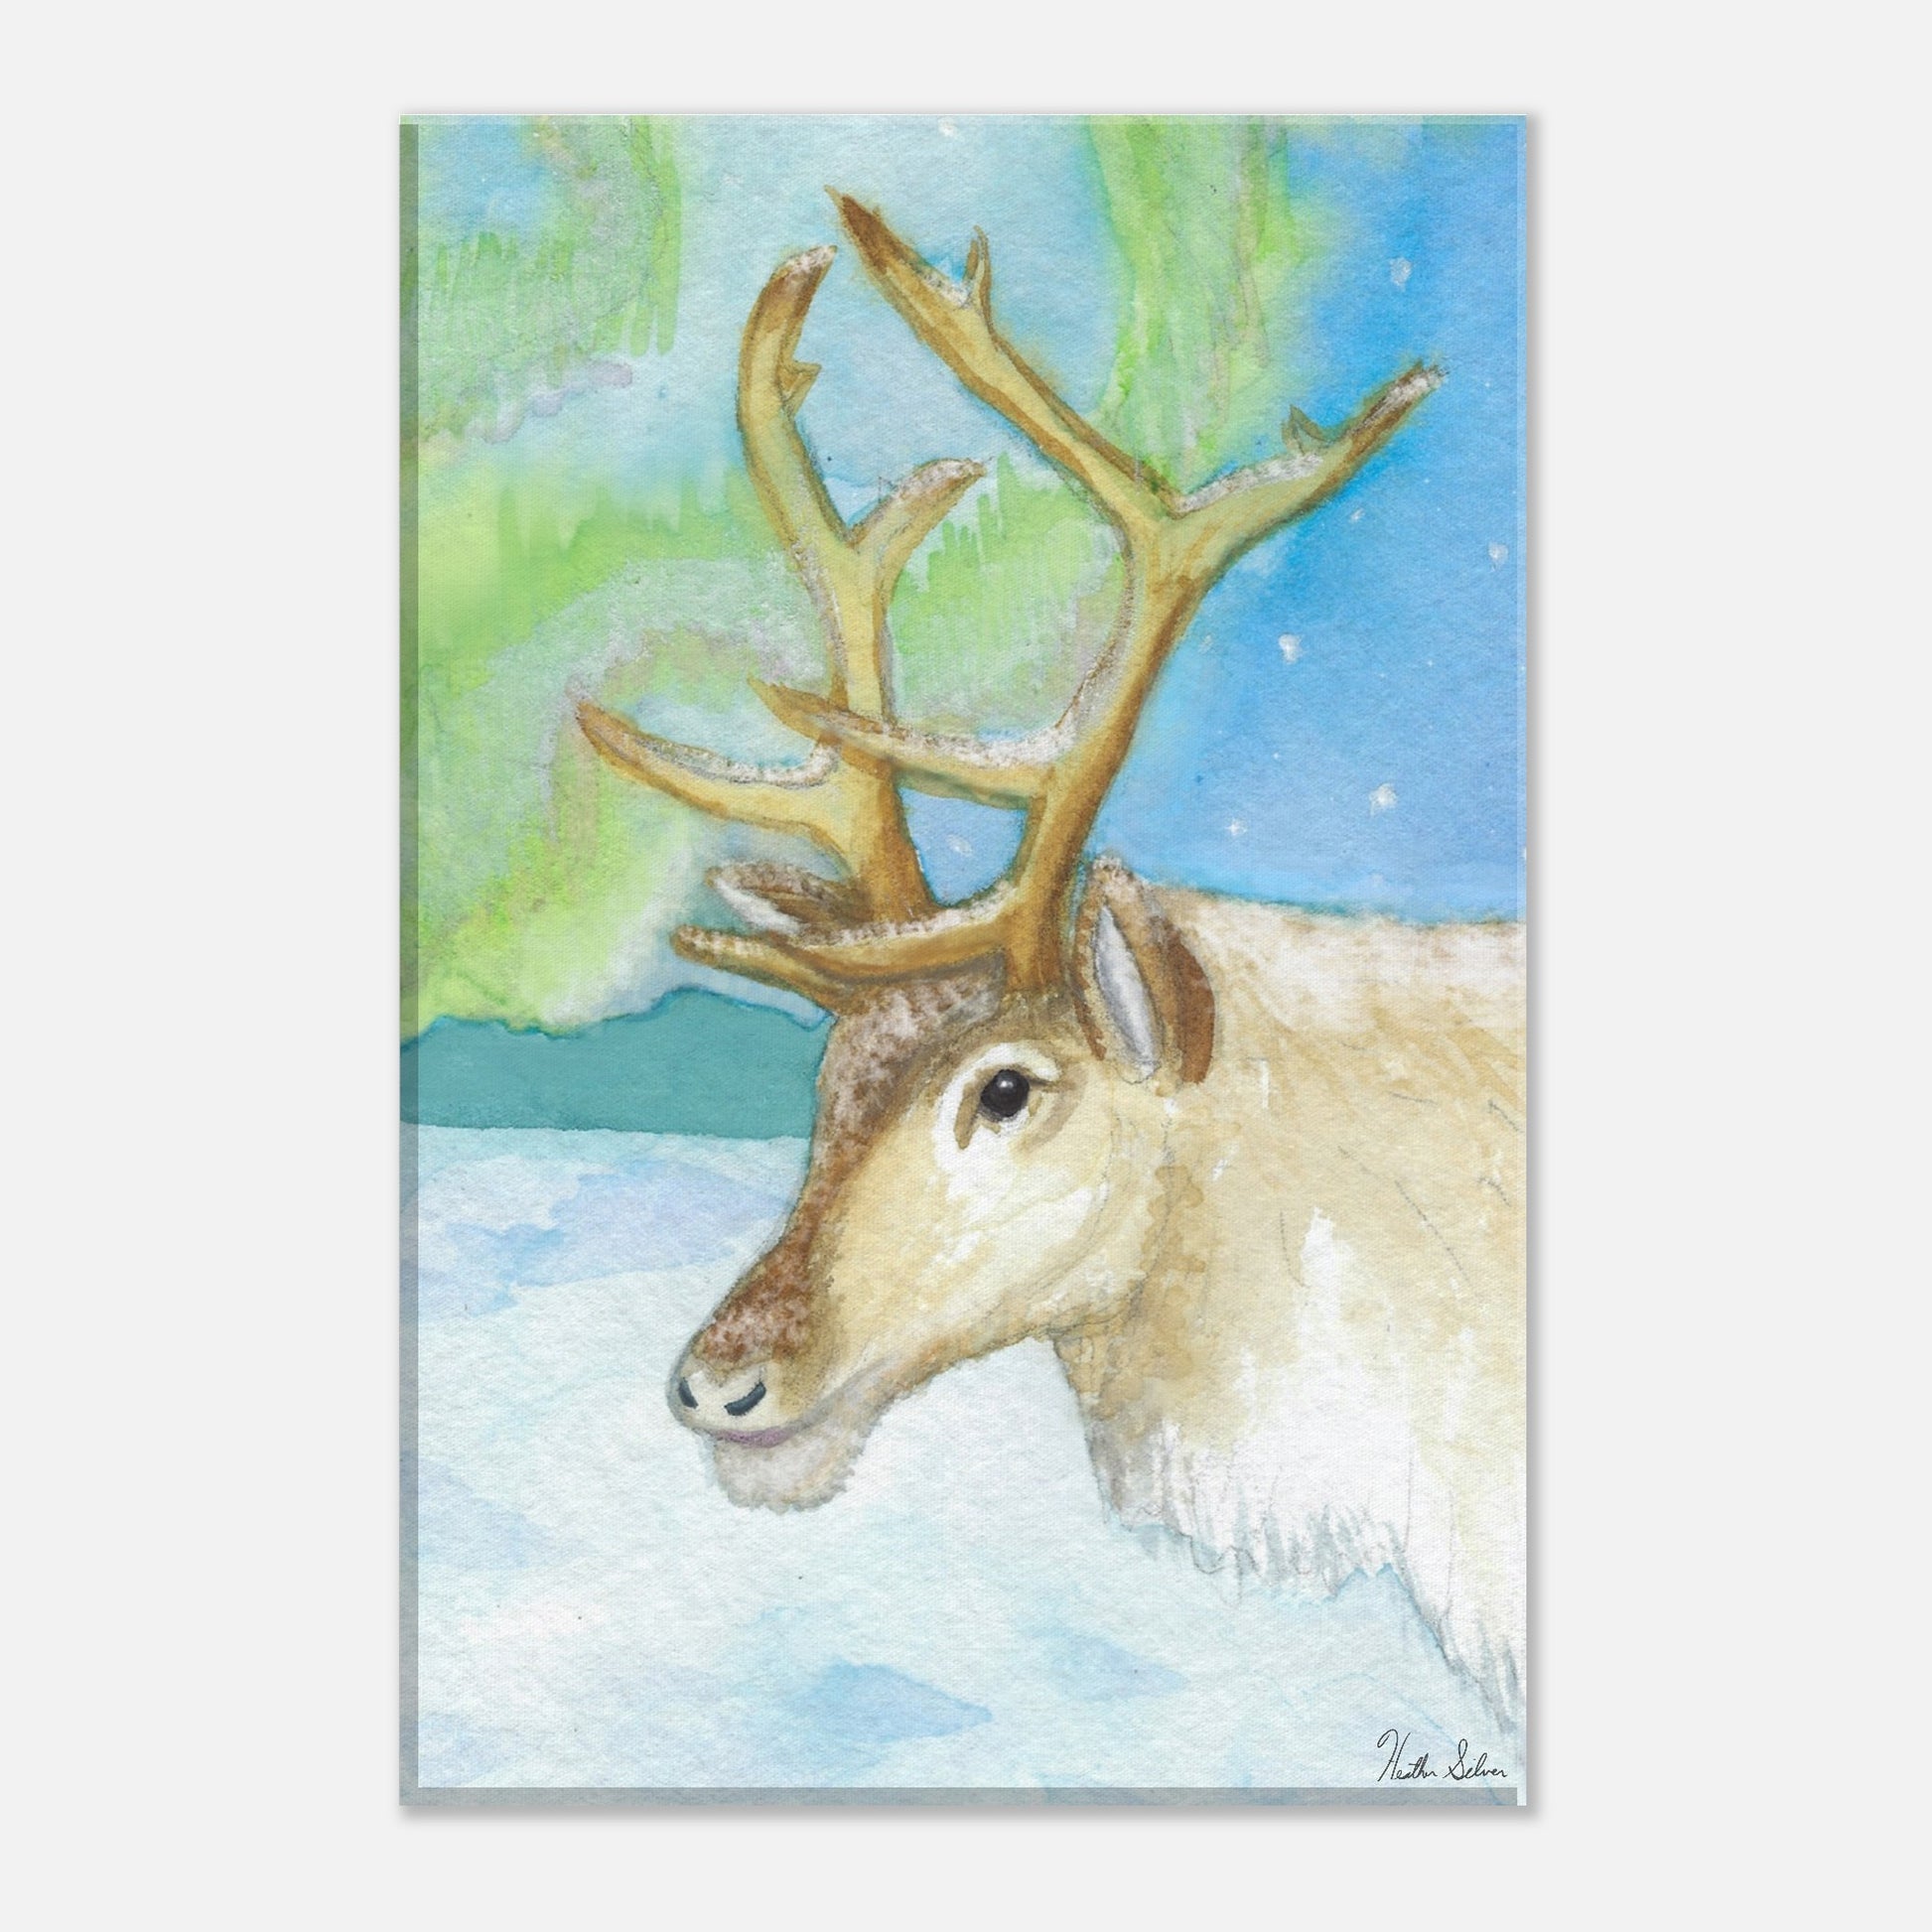 12 by 18 inch slim canvas print of Heather Silver's watercolor painting, northern lights reindeer.